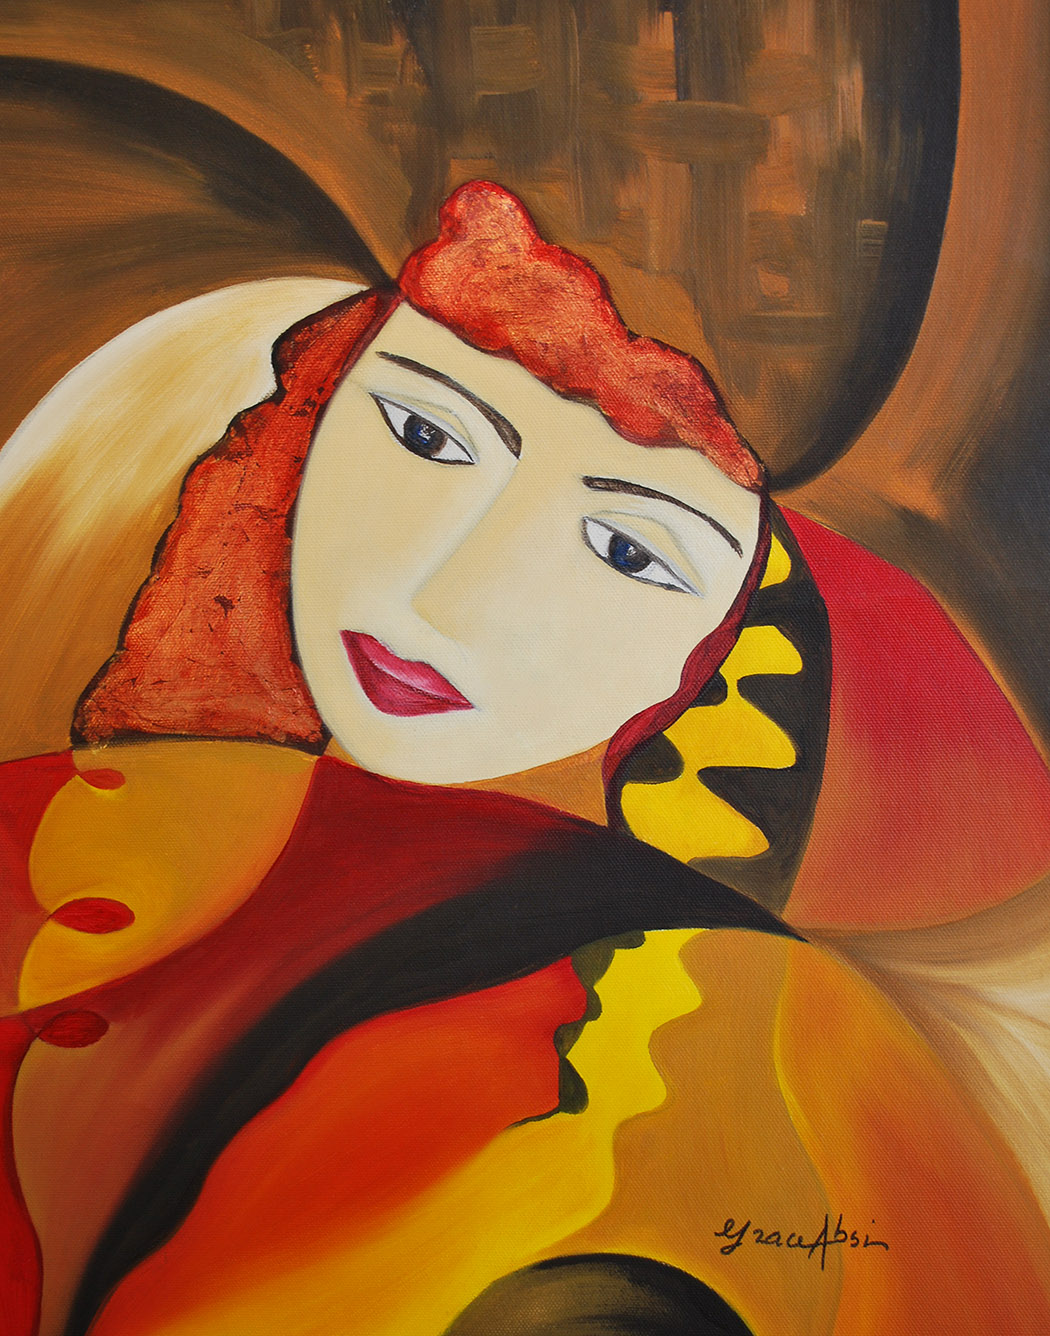 Absi Grace, The Dreamer 2, Oil Painting on Canvas